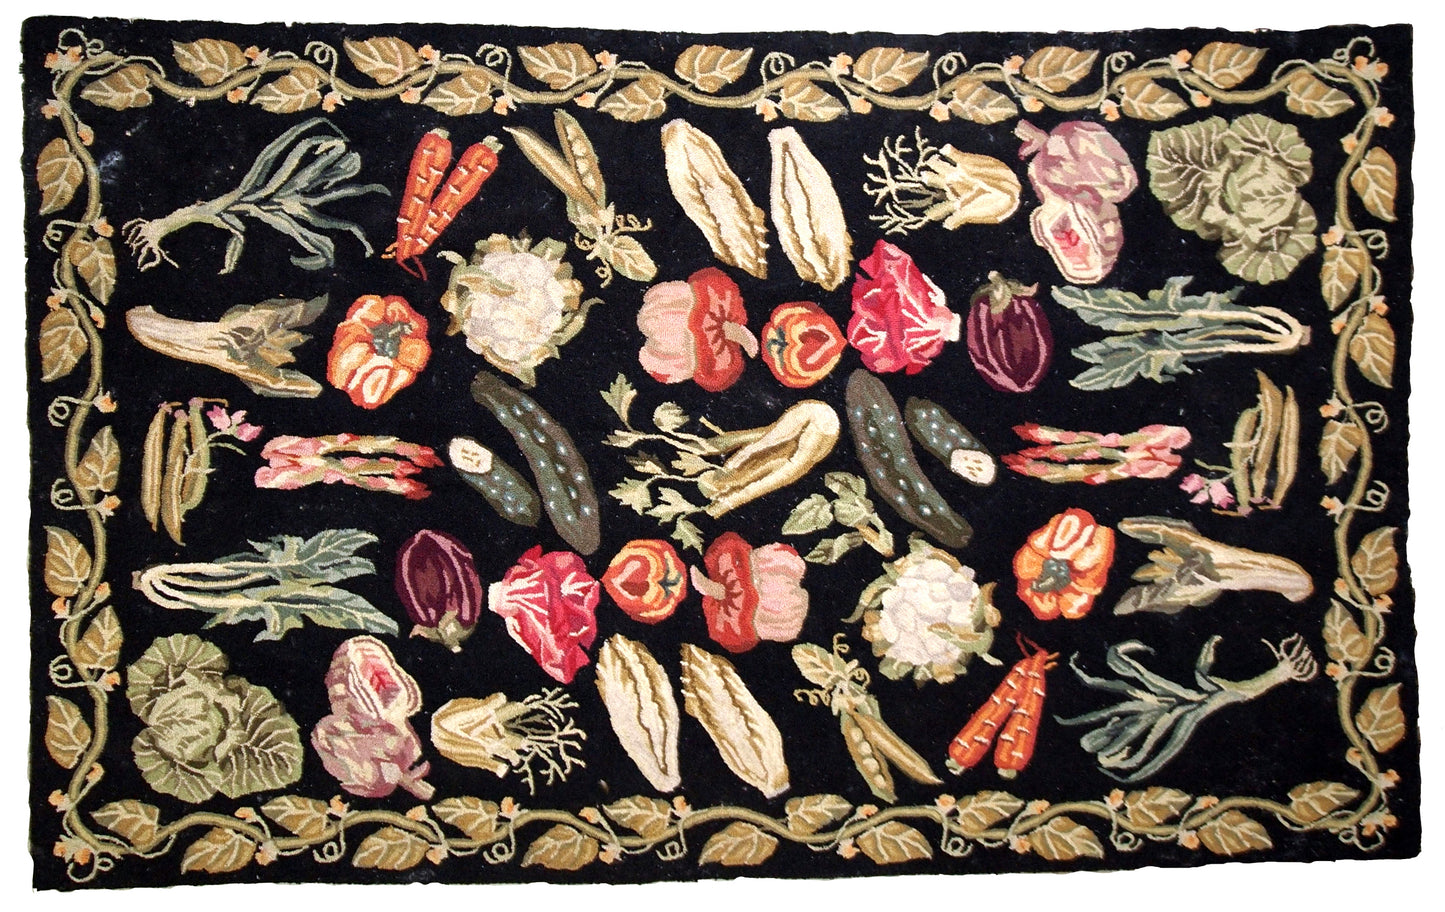 Handmade antique American Hooked rug in black color with variety of vegetables. This rug has been made in the beginning of 20th century, it remains in original good condition.